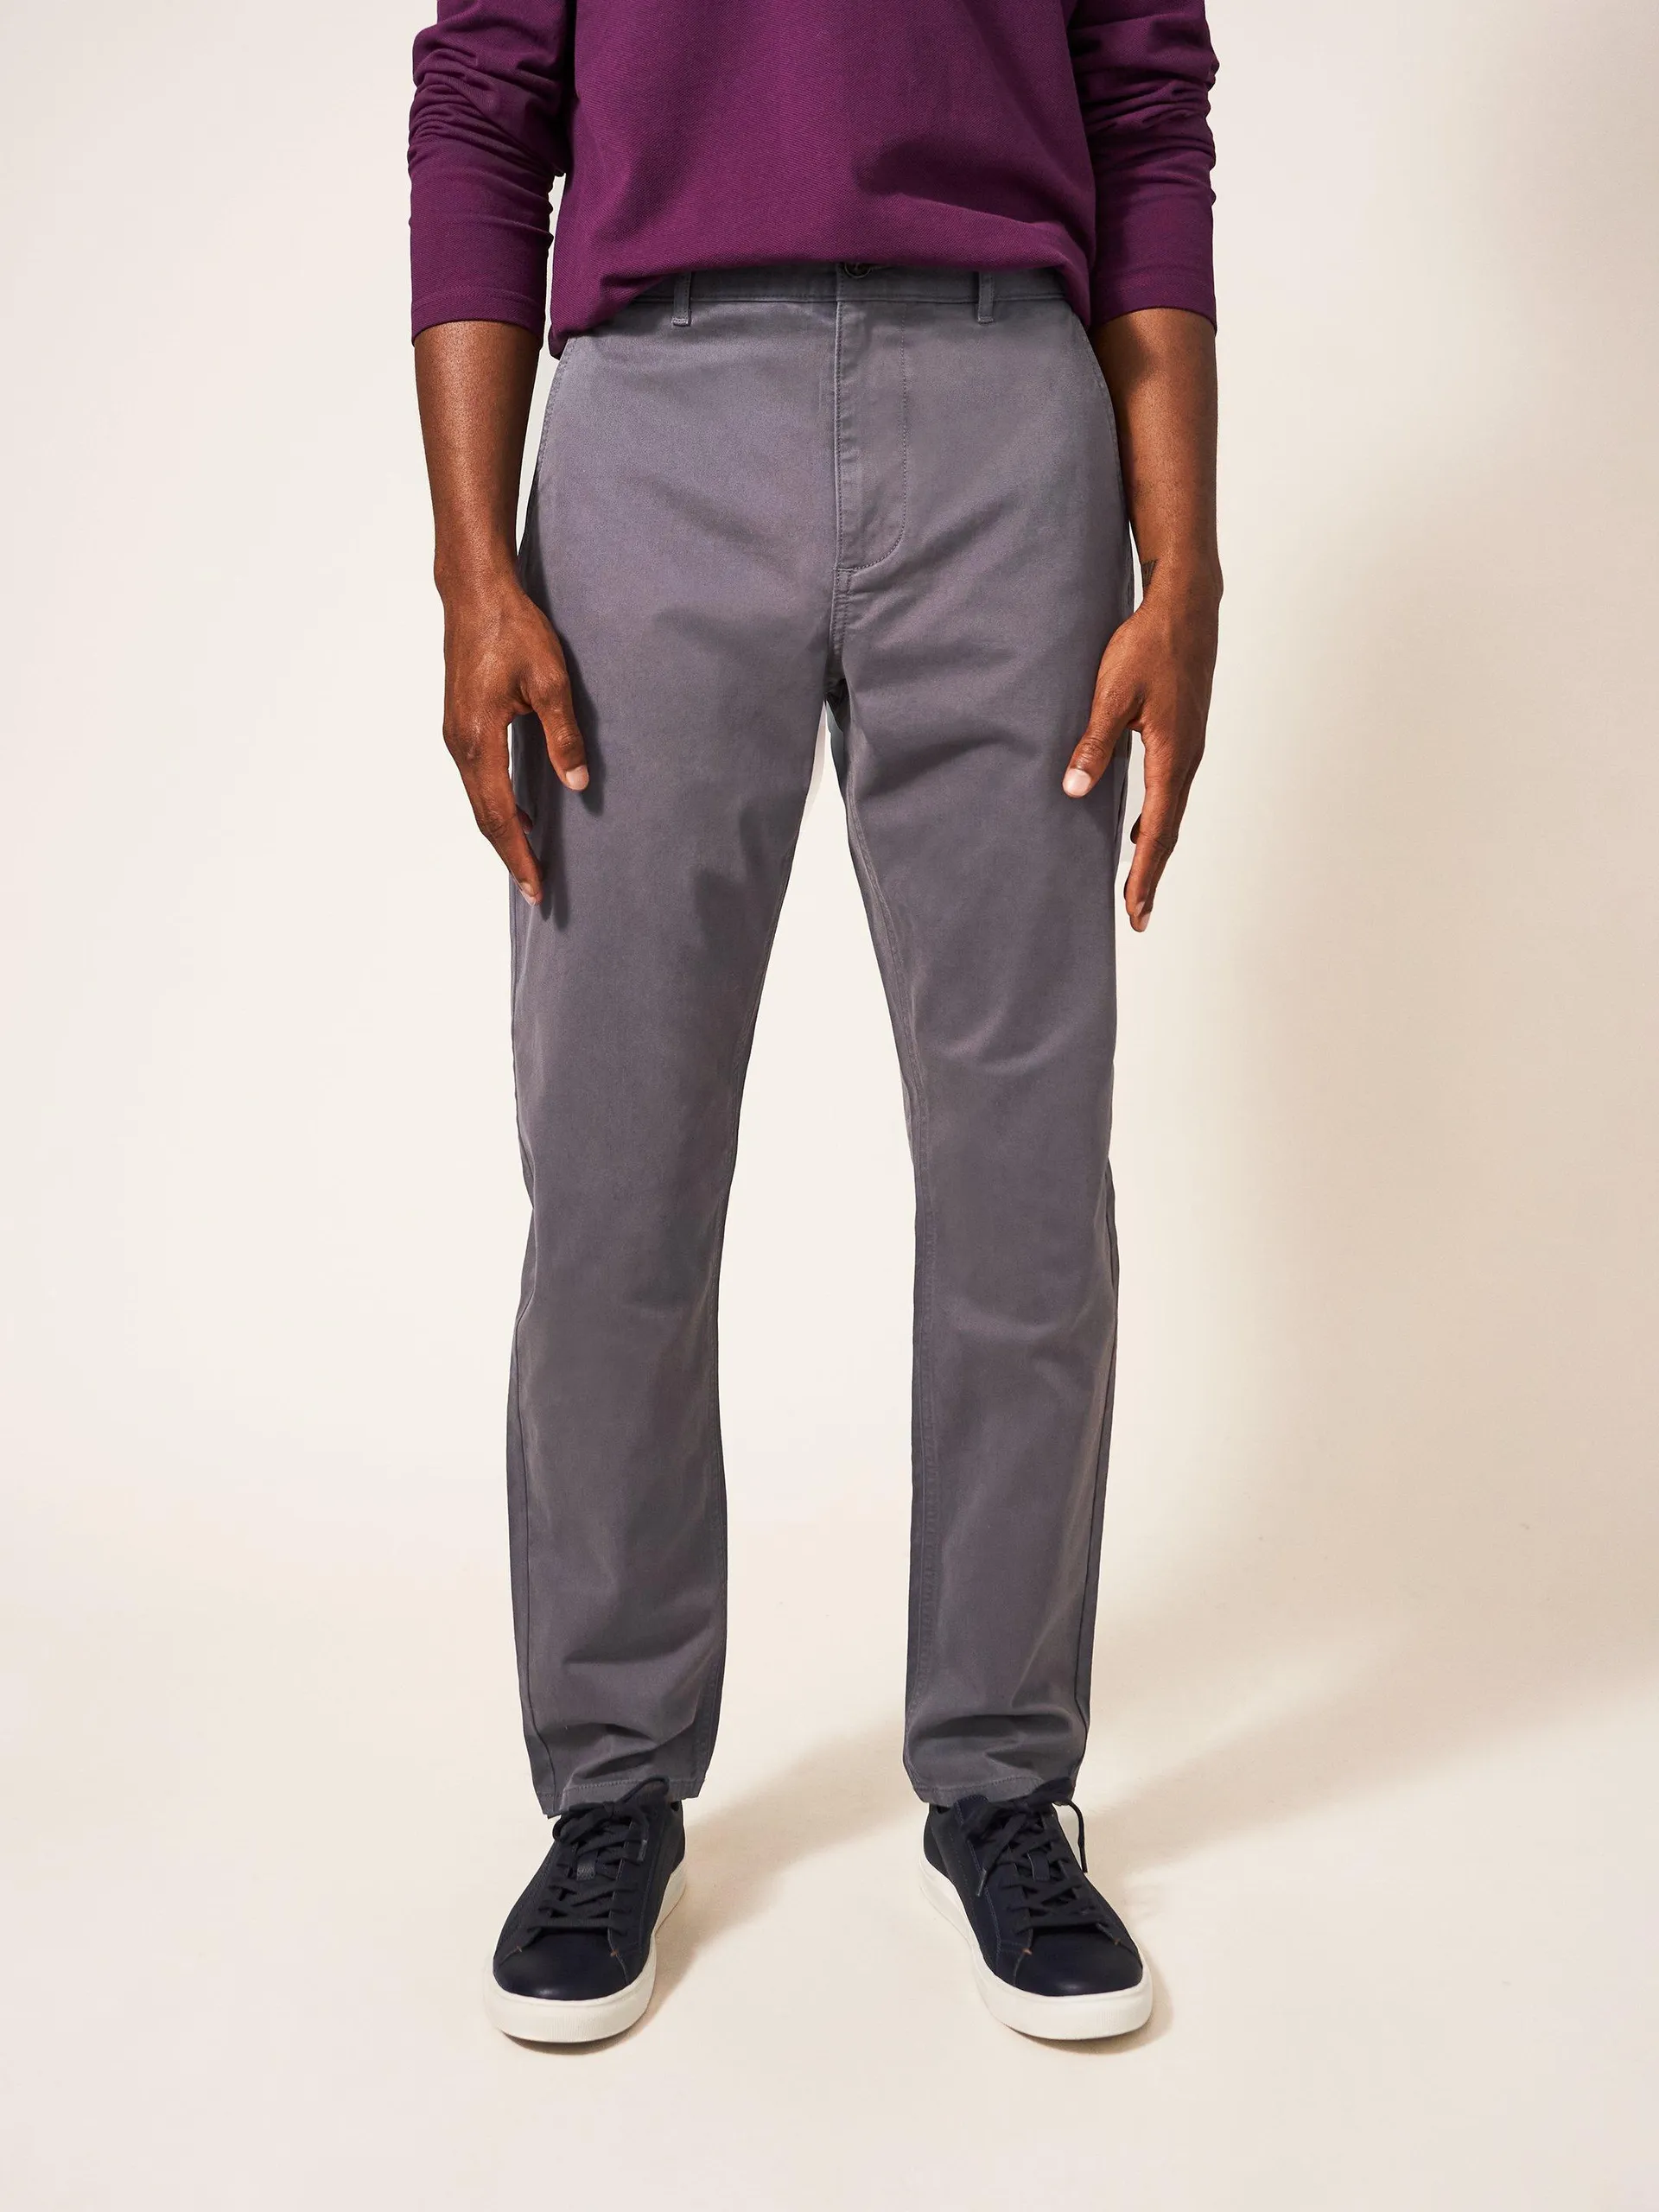 Elm Chino Trouser in MID GREY